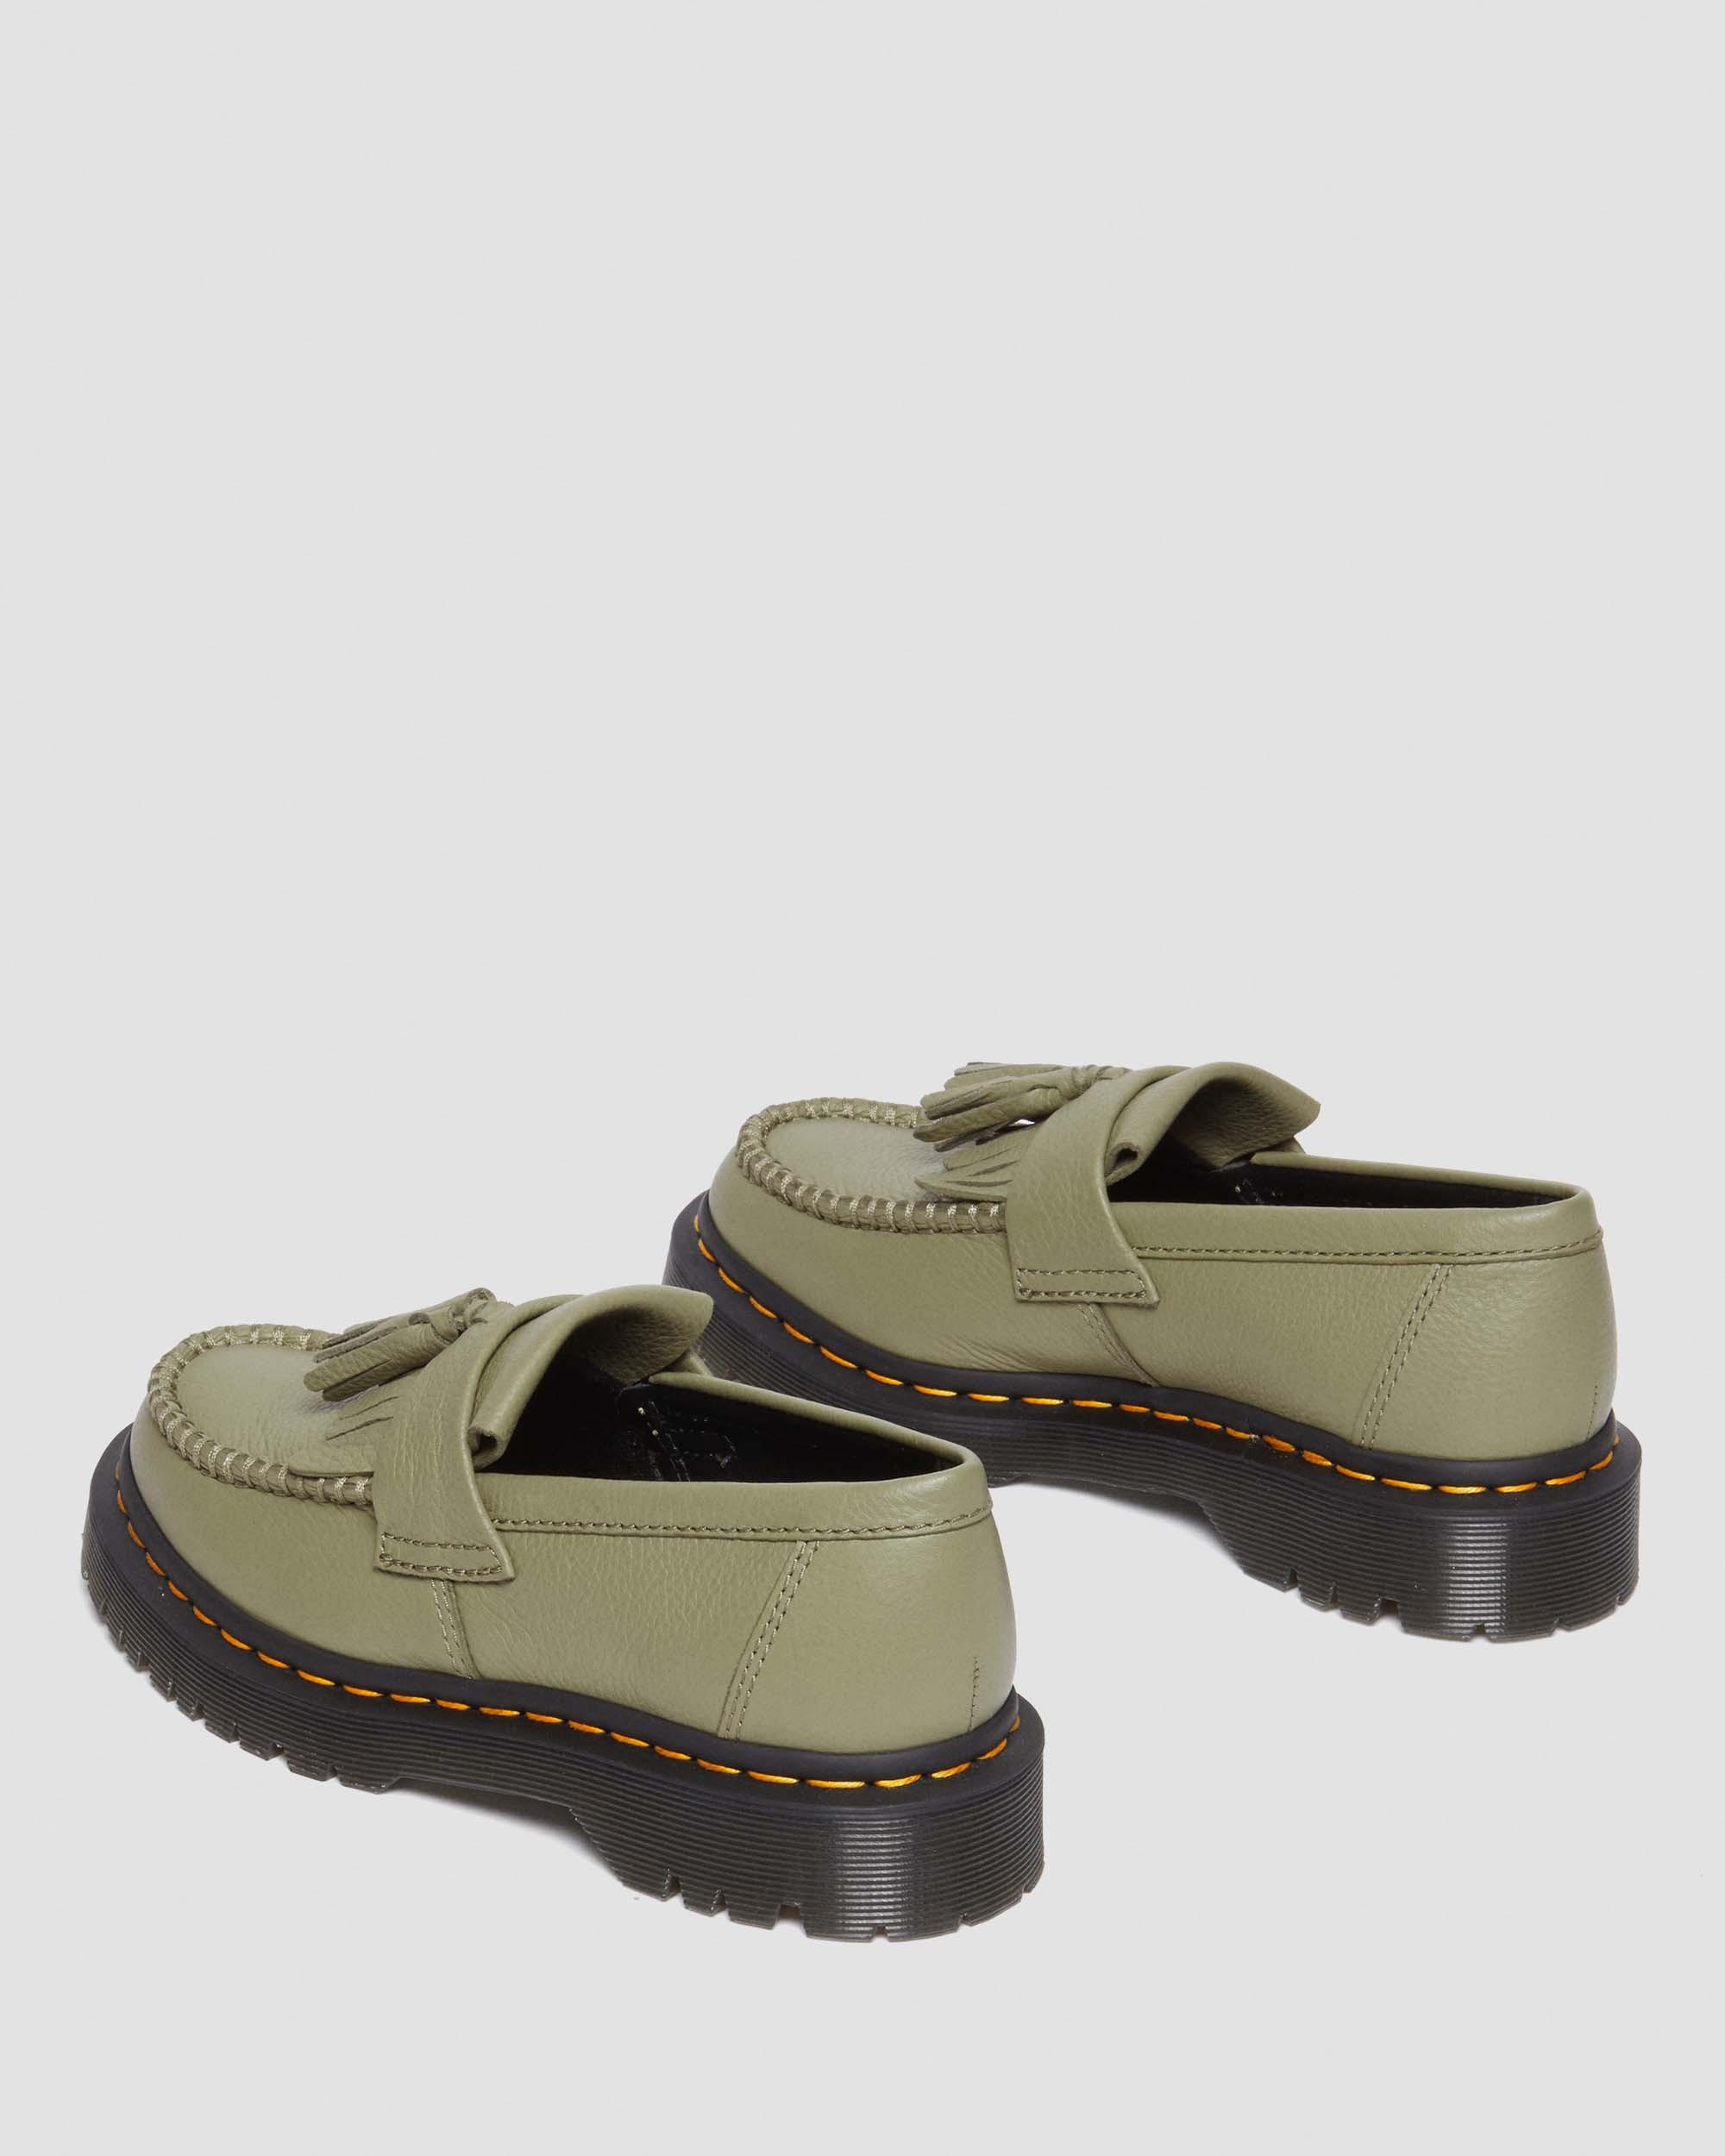 Adrian Virginia Leather Tassel Loafers in Muted Olive